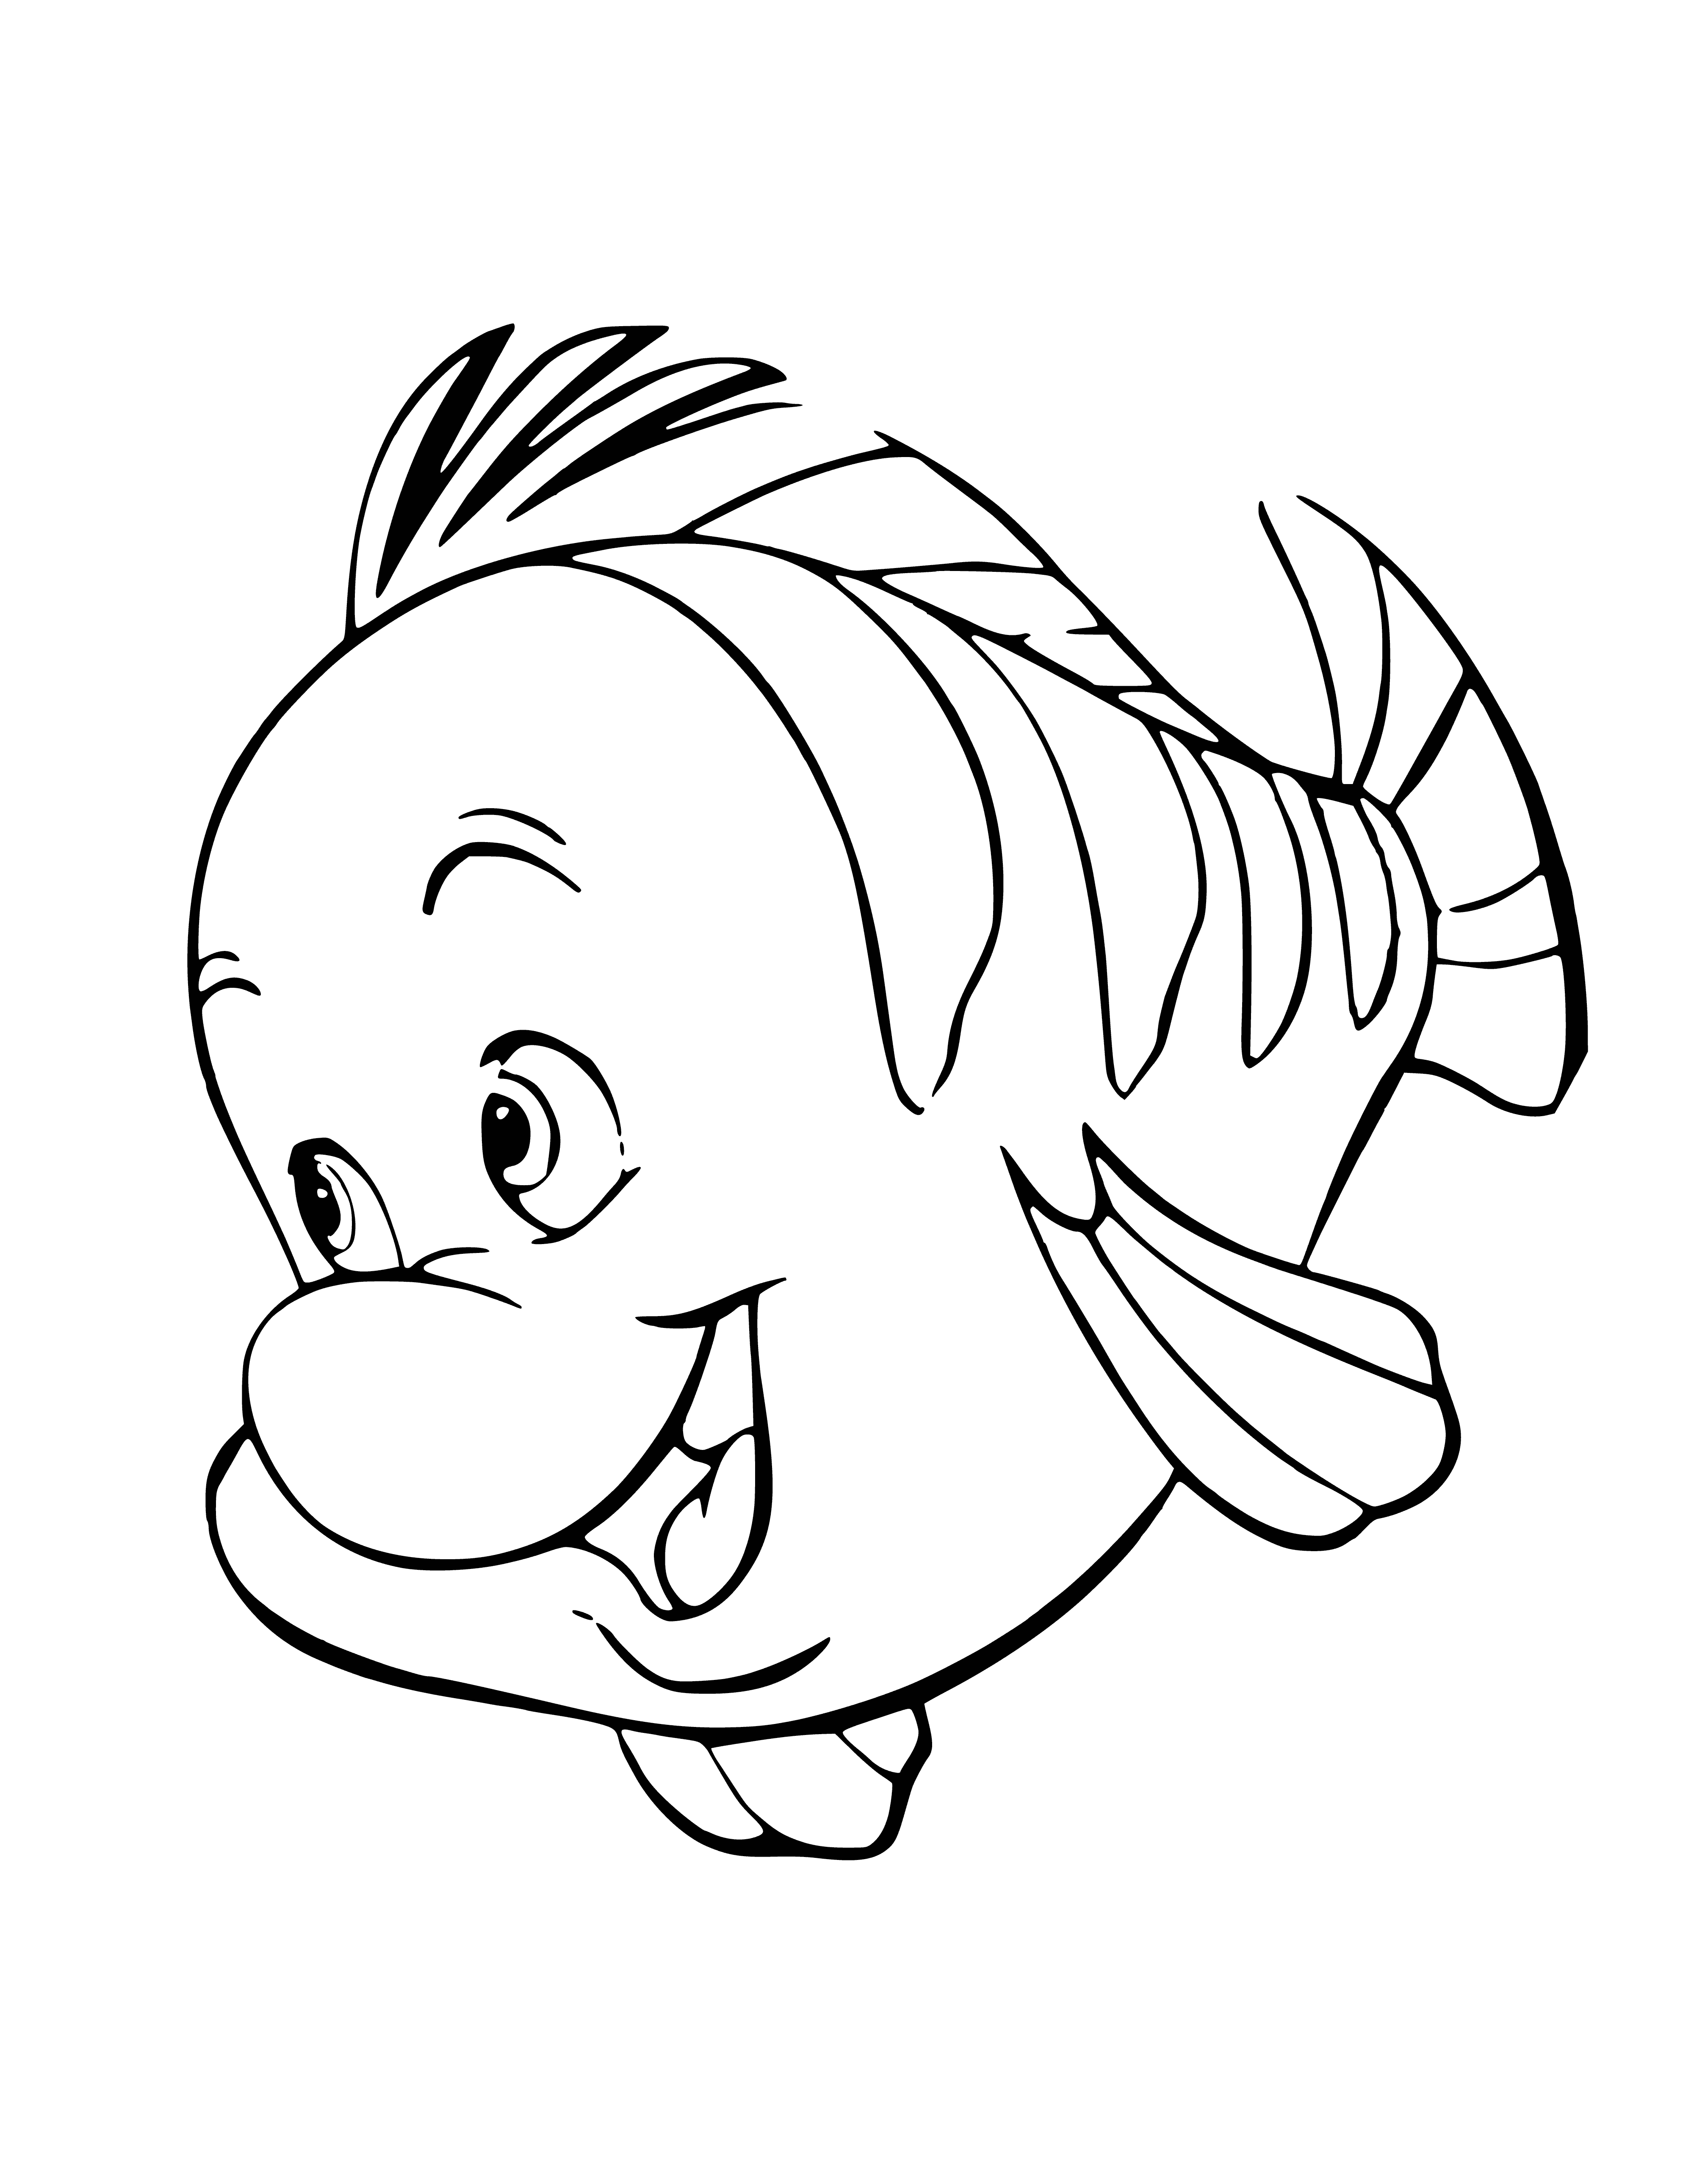 Fish Flounder coloring page